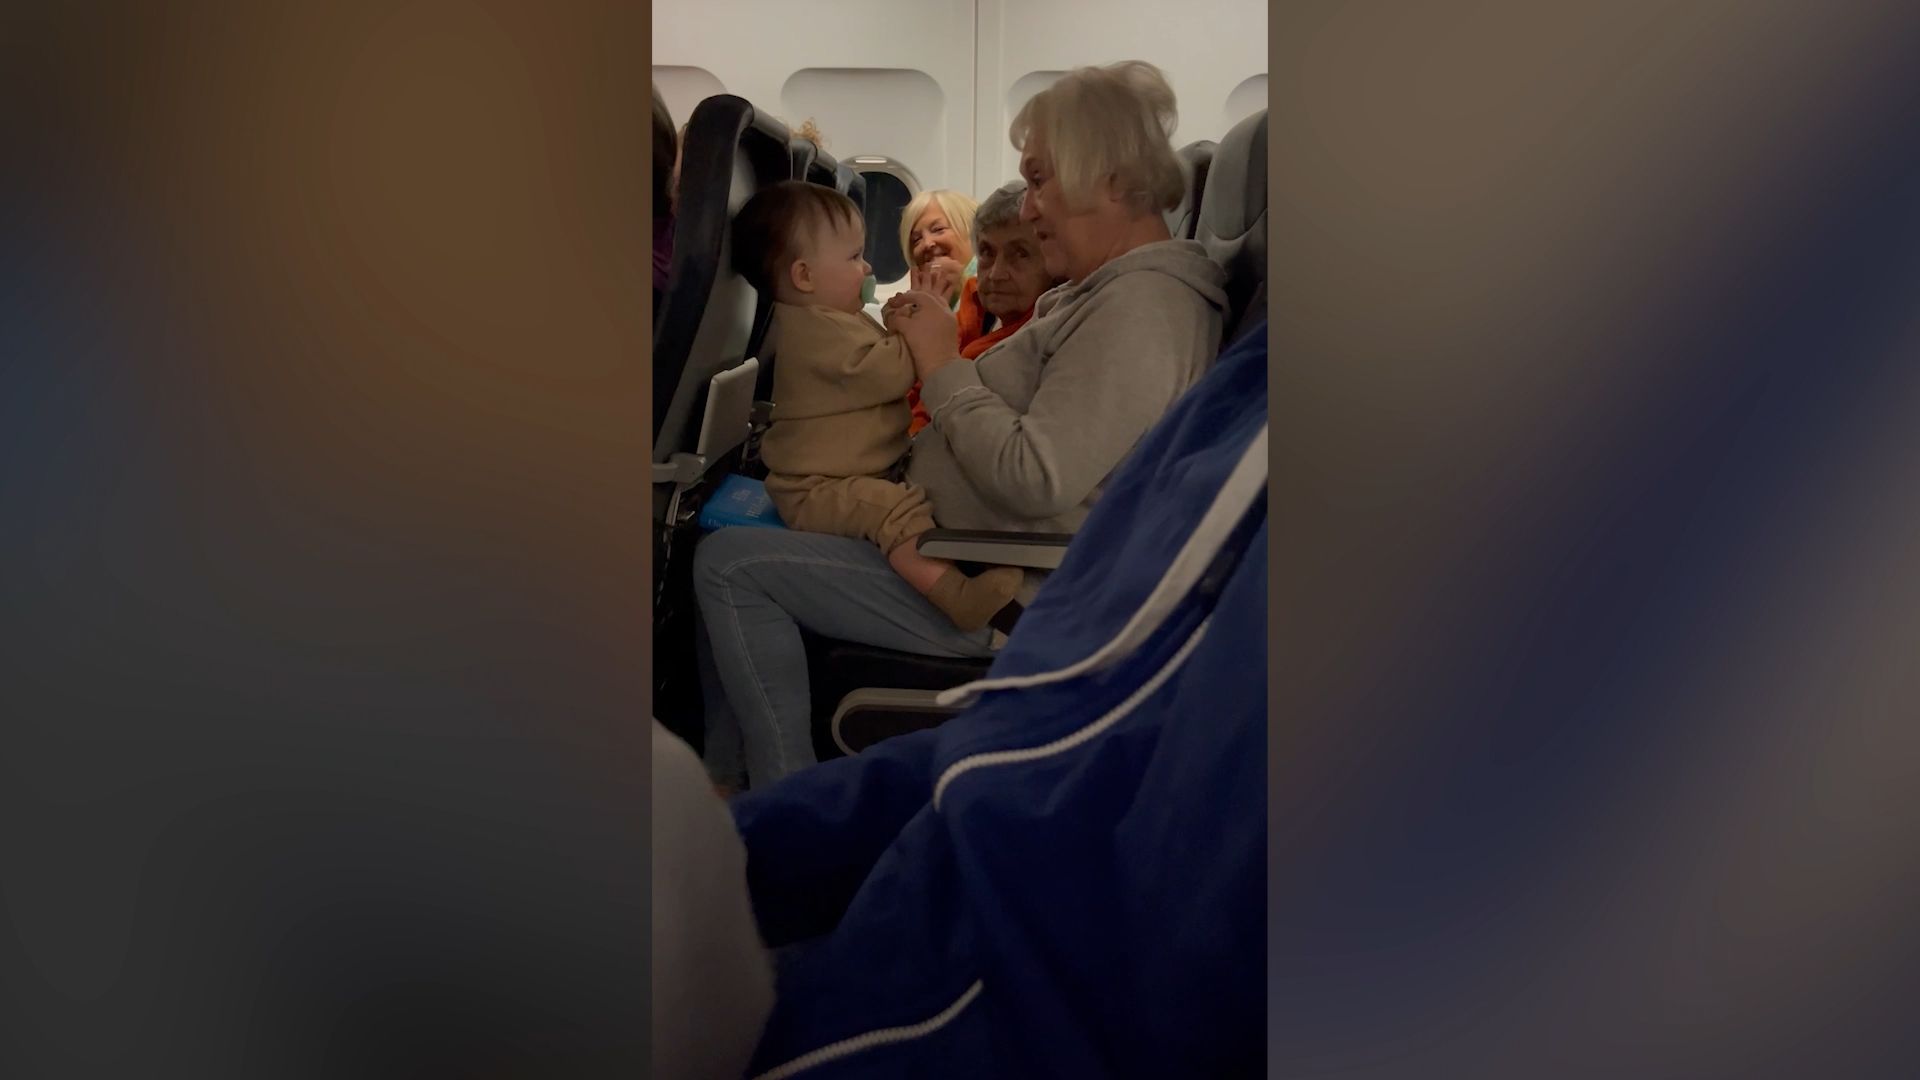 First flight: Helpful elderly ladies help mother with crying baby